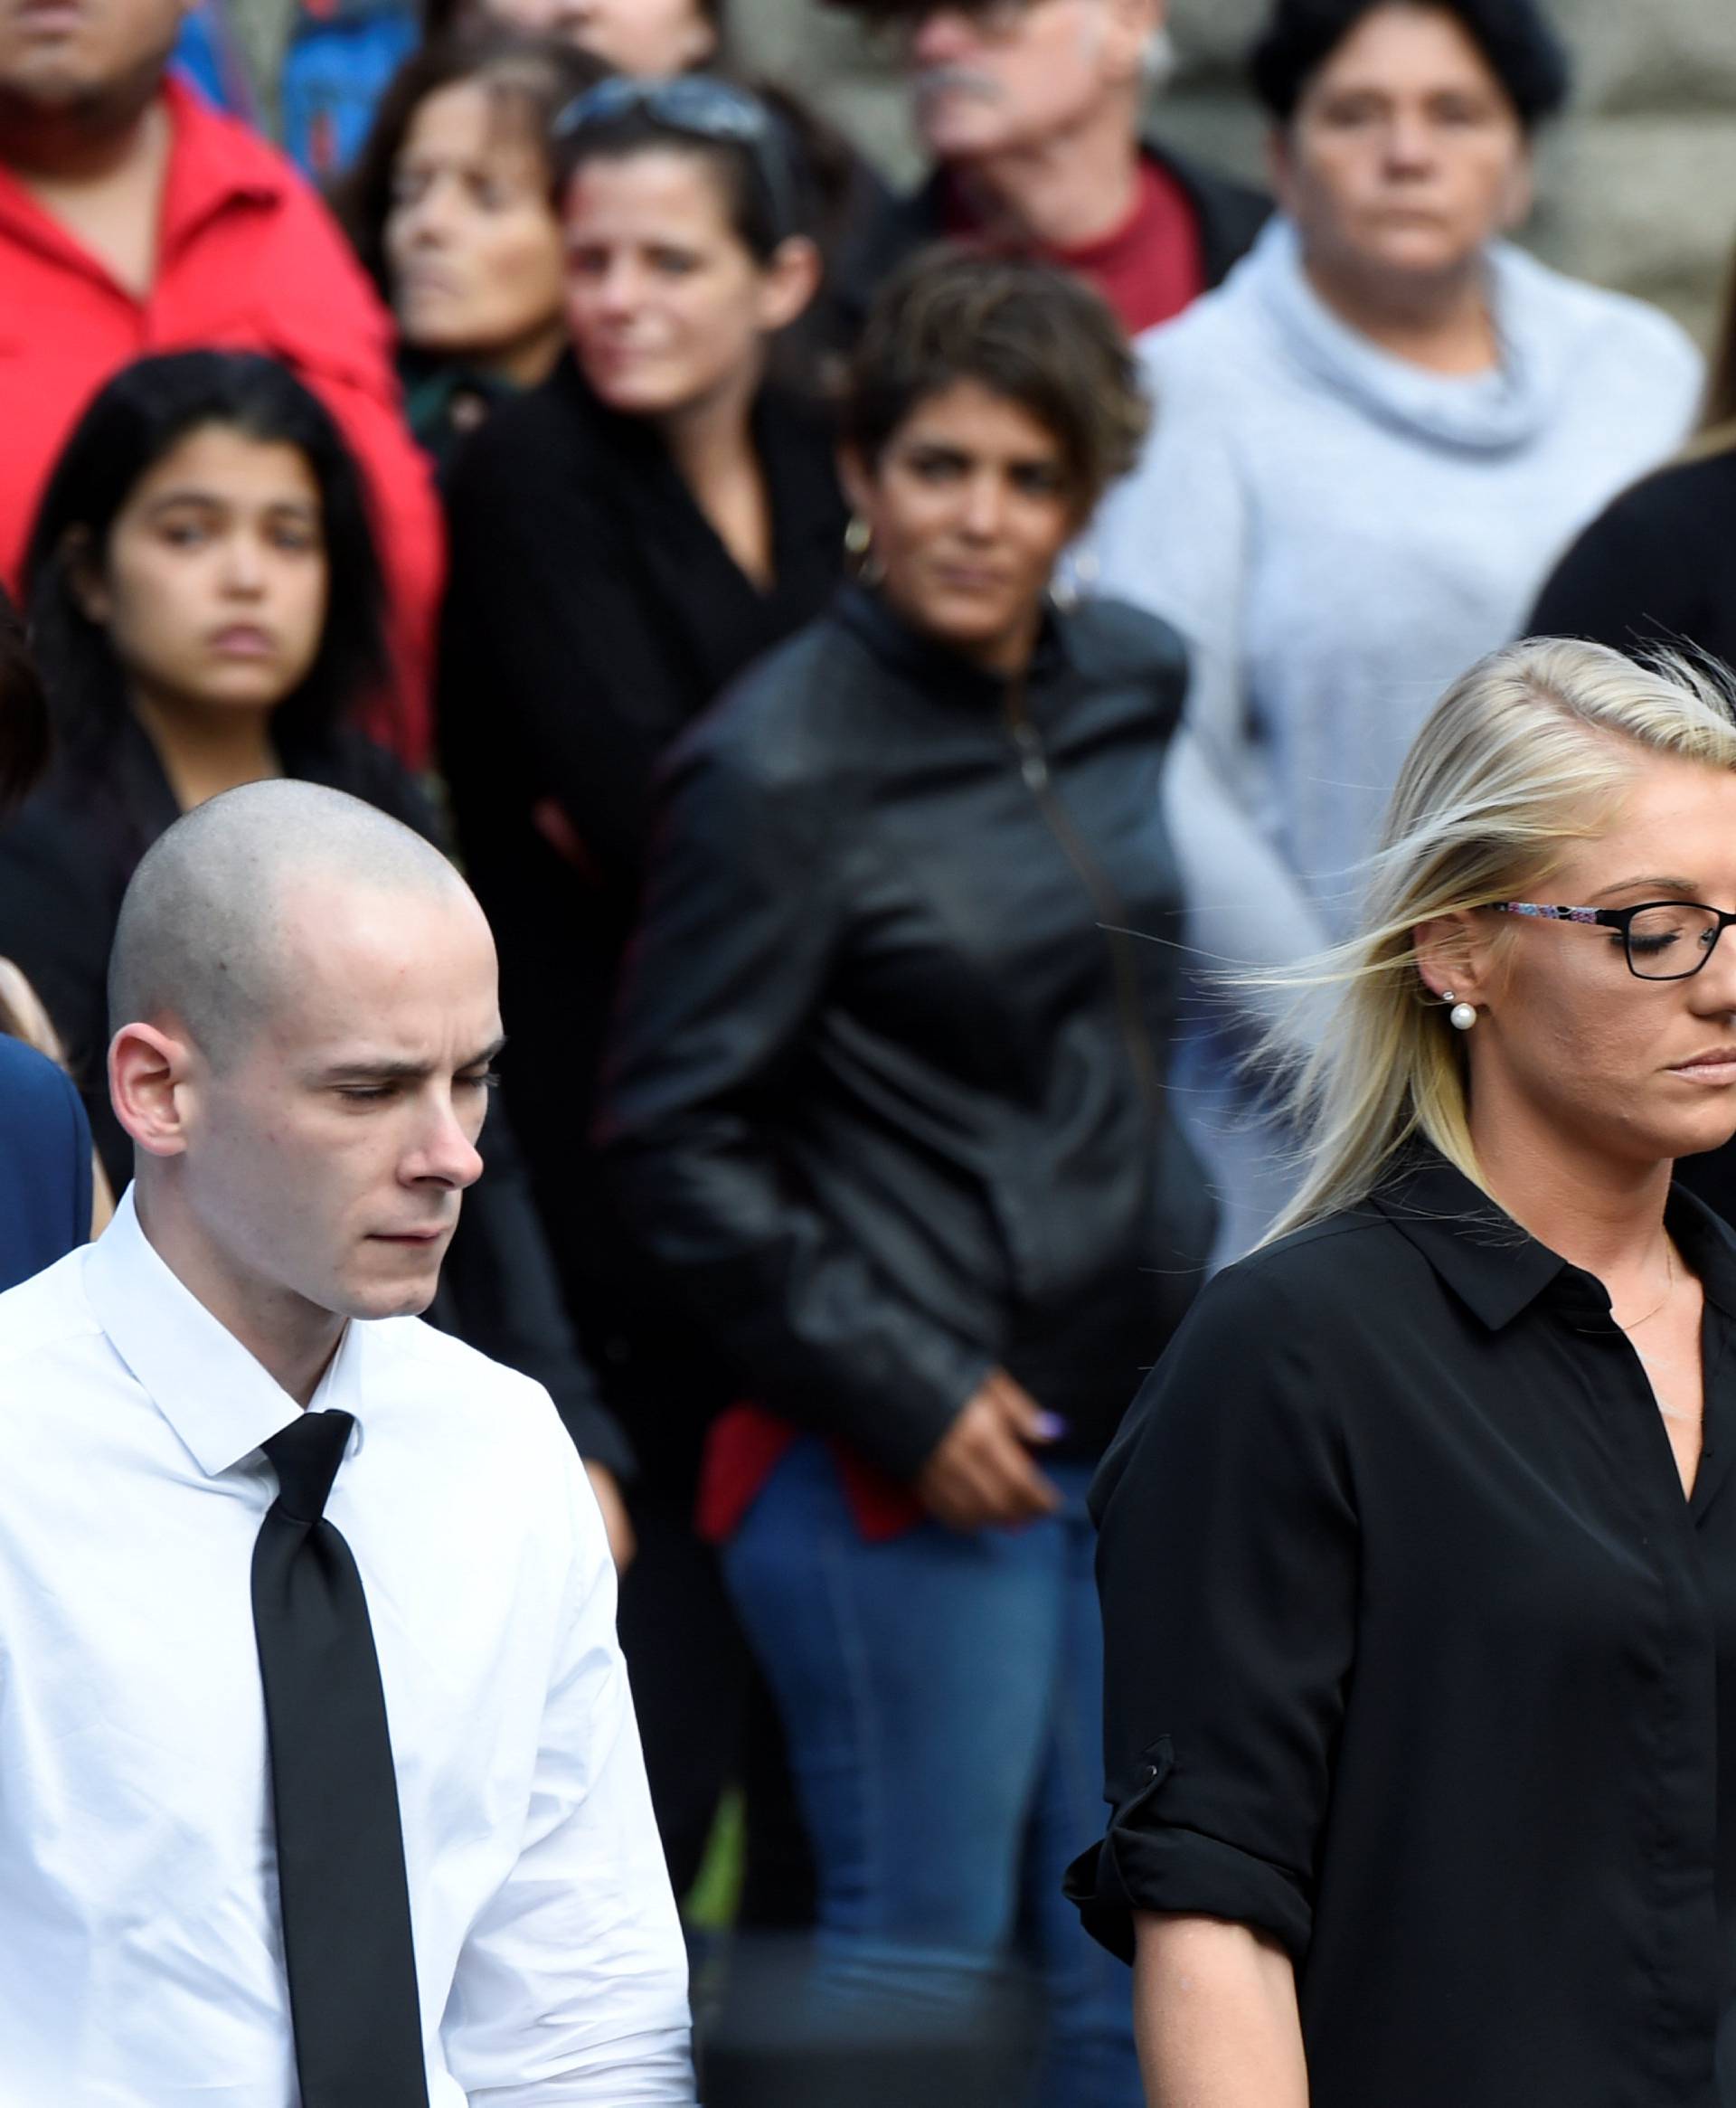 Mourners attend a combined wake for the victims of Saturday's limousine crash in Amsterdam